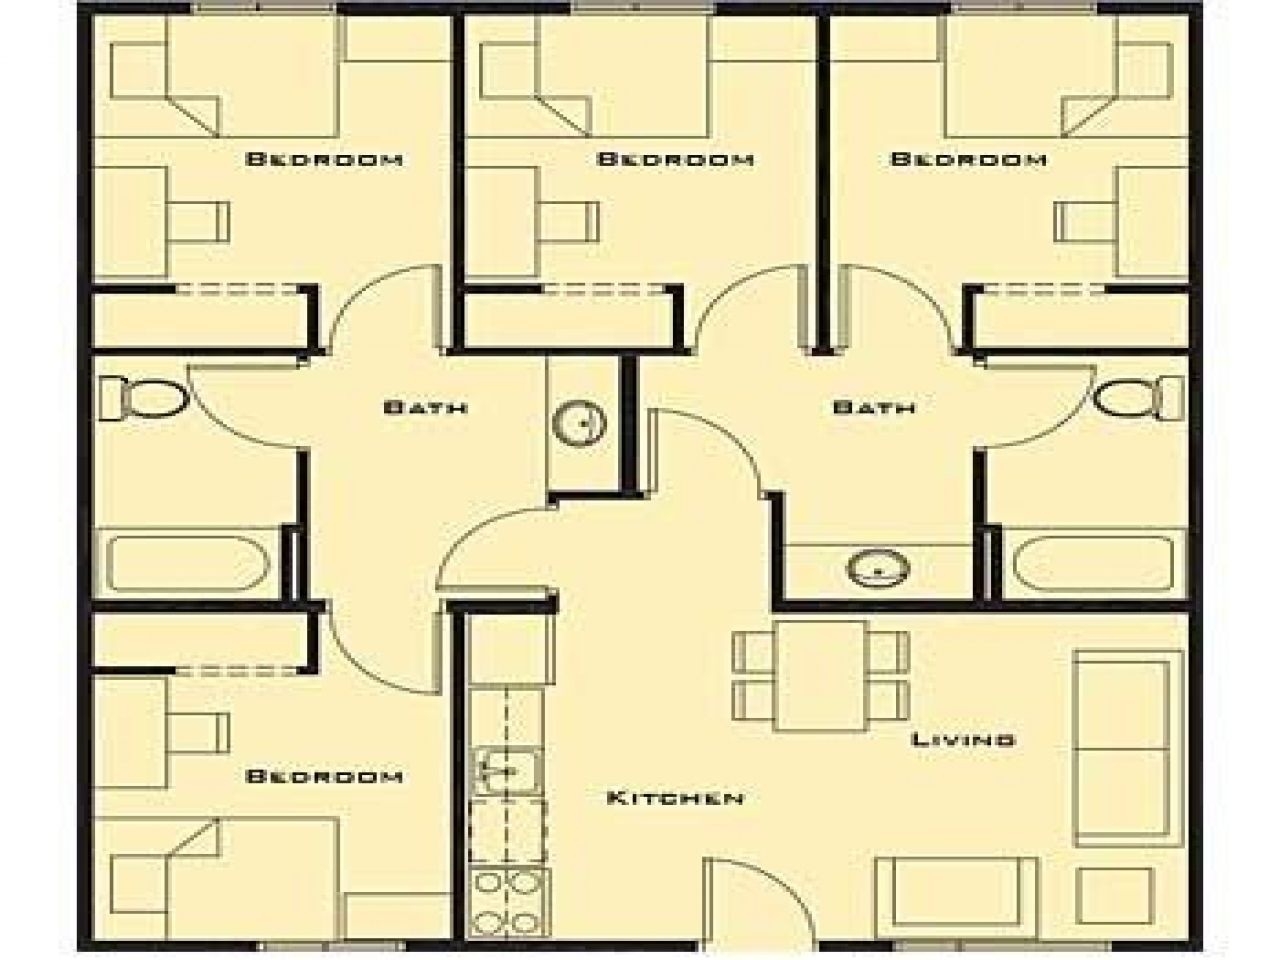 Classy home addition for 4 bedroom 2 bath plans aol image search results throughout marvelous 4 bedroom house plan